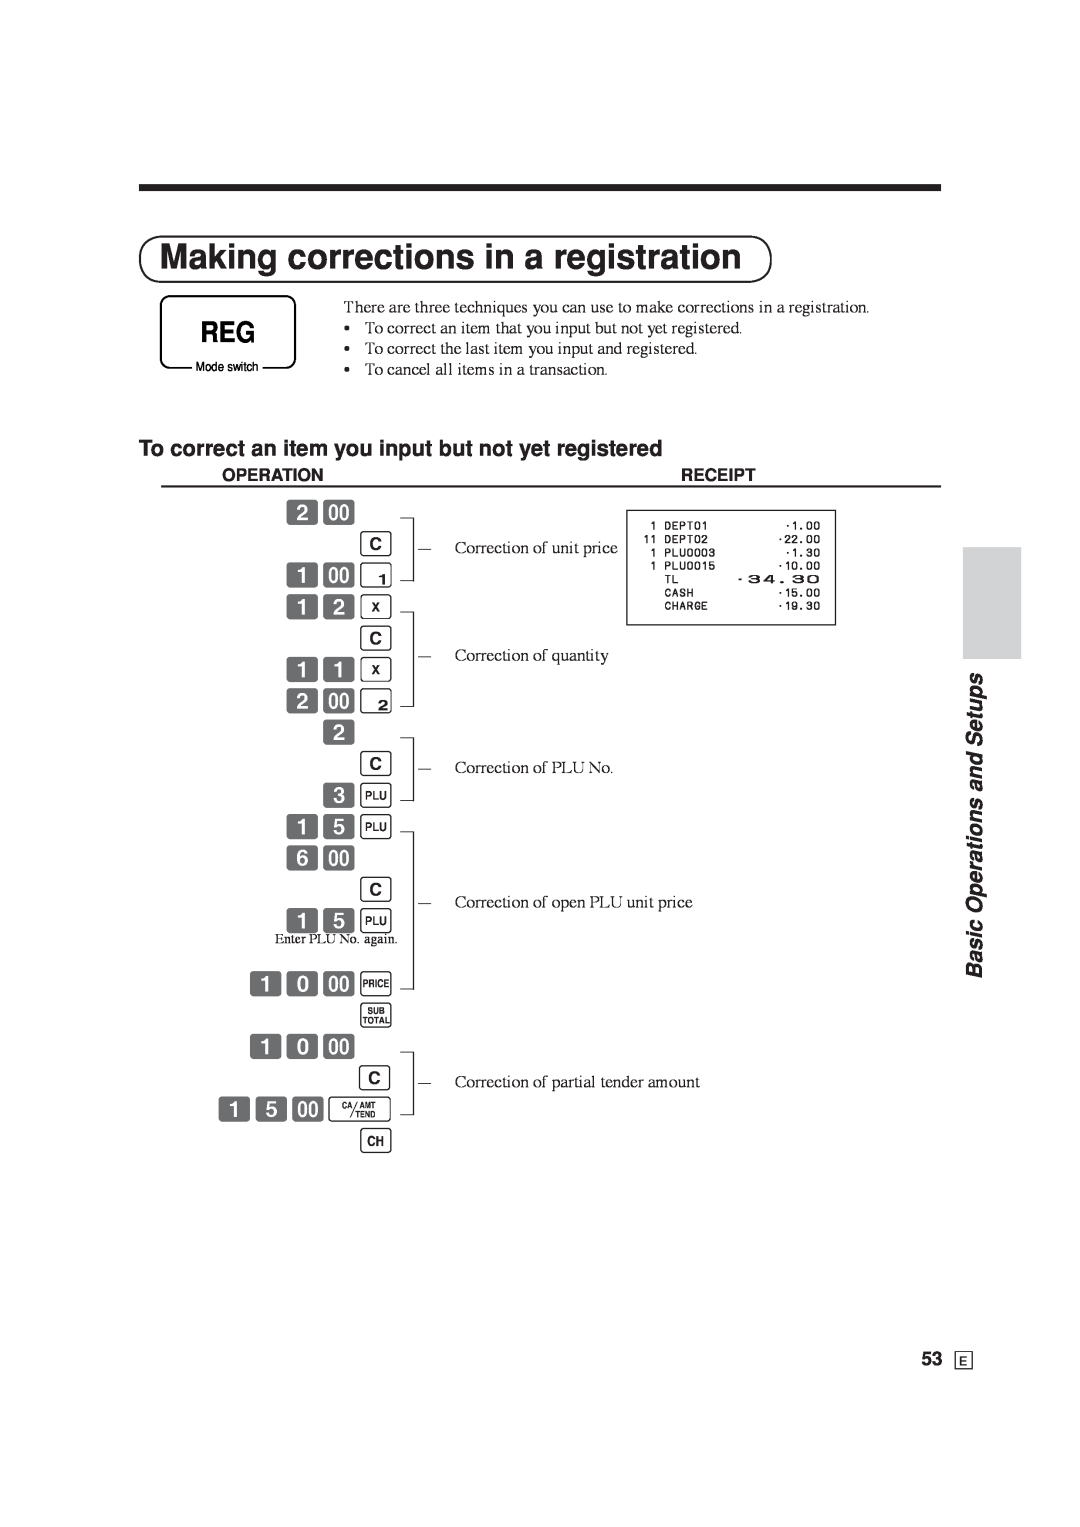 Casio SE-C6000 Making corrections in a registration, To correct an item you input but not yet registered, C 1 C, 3+ 15+ 